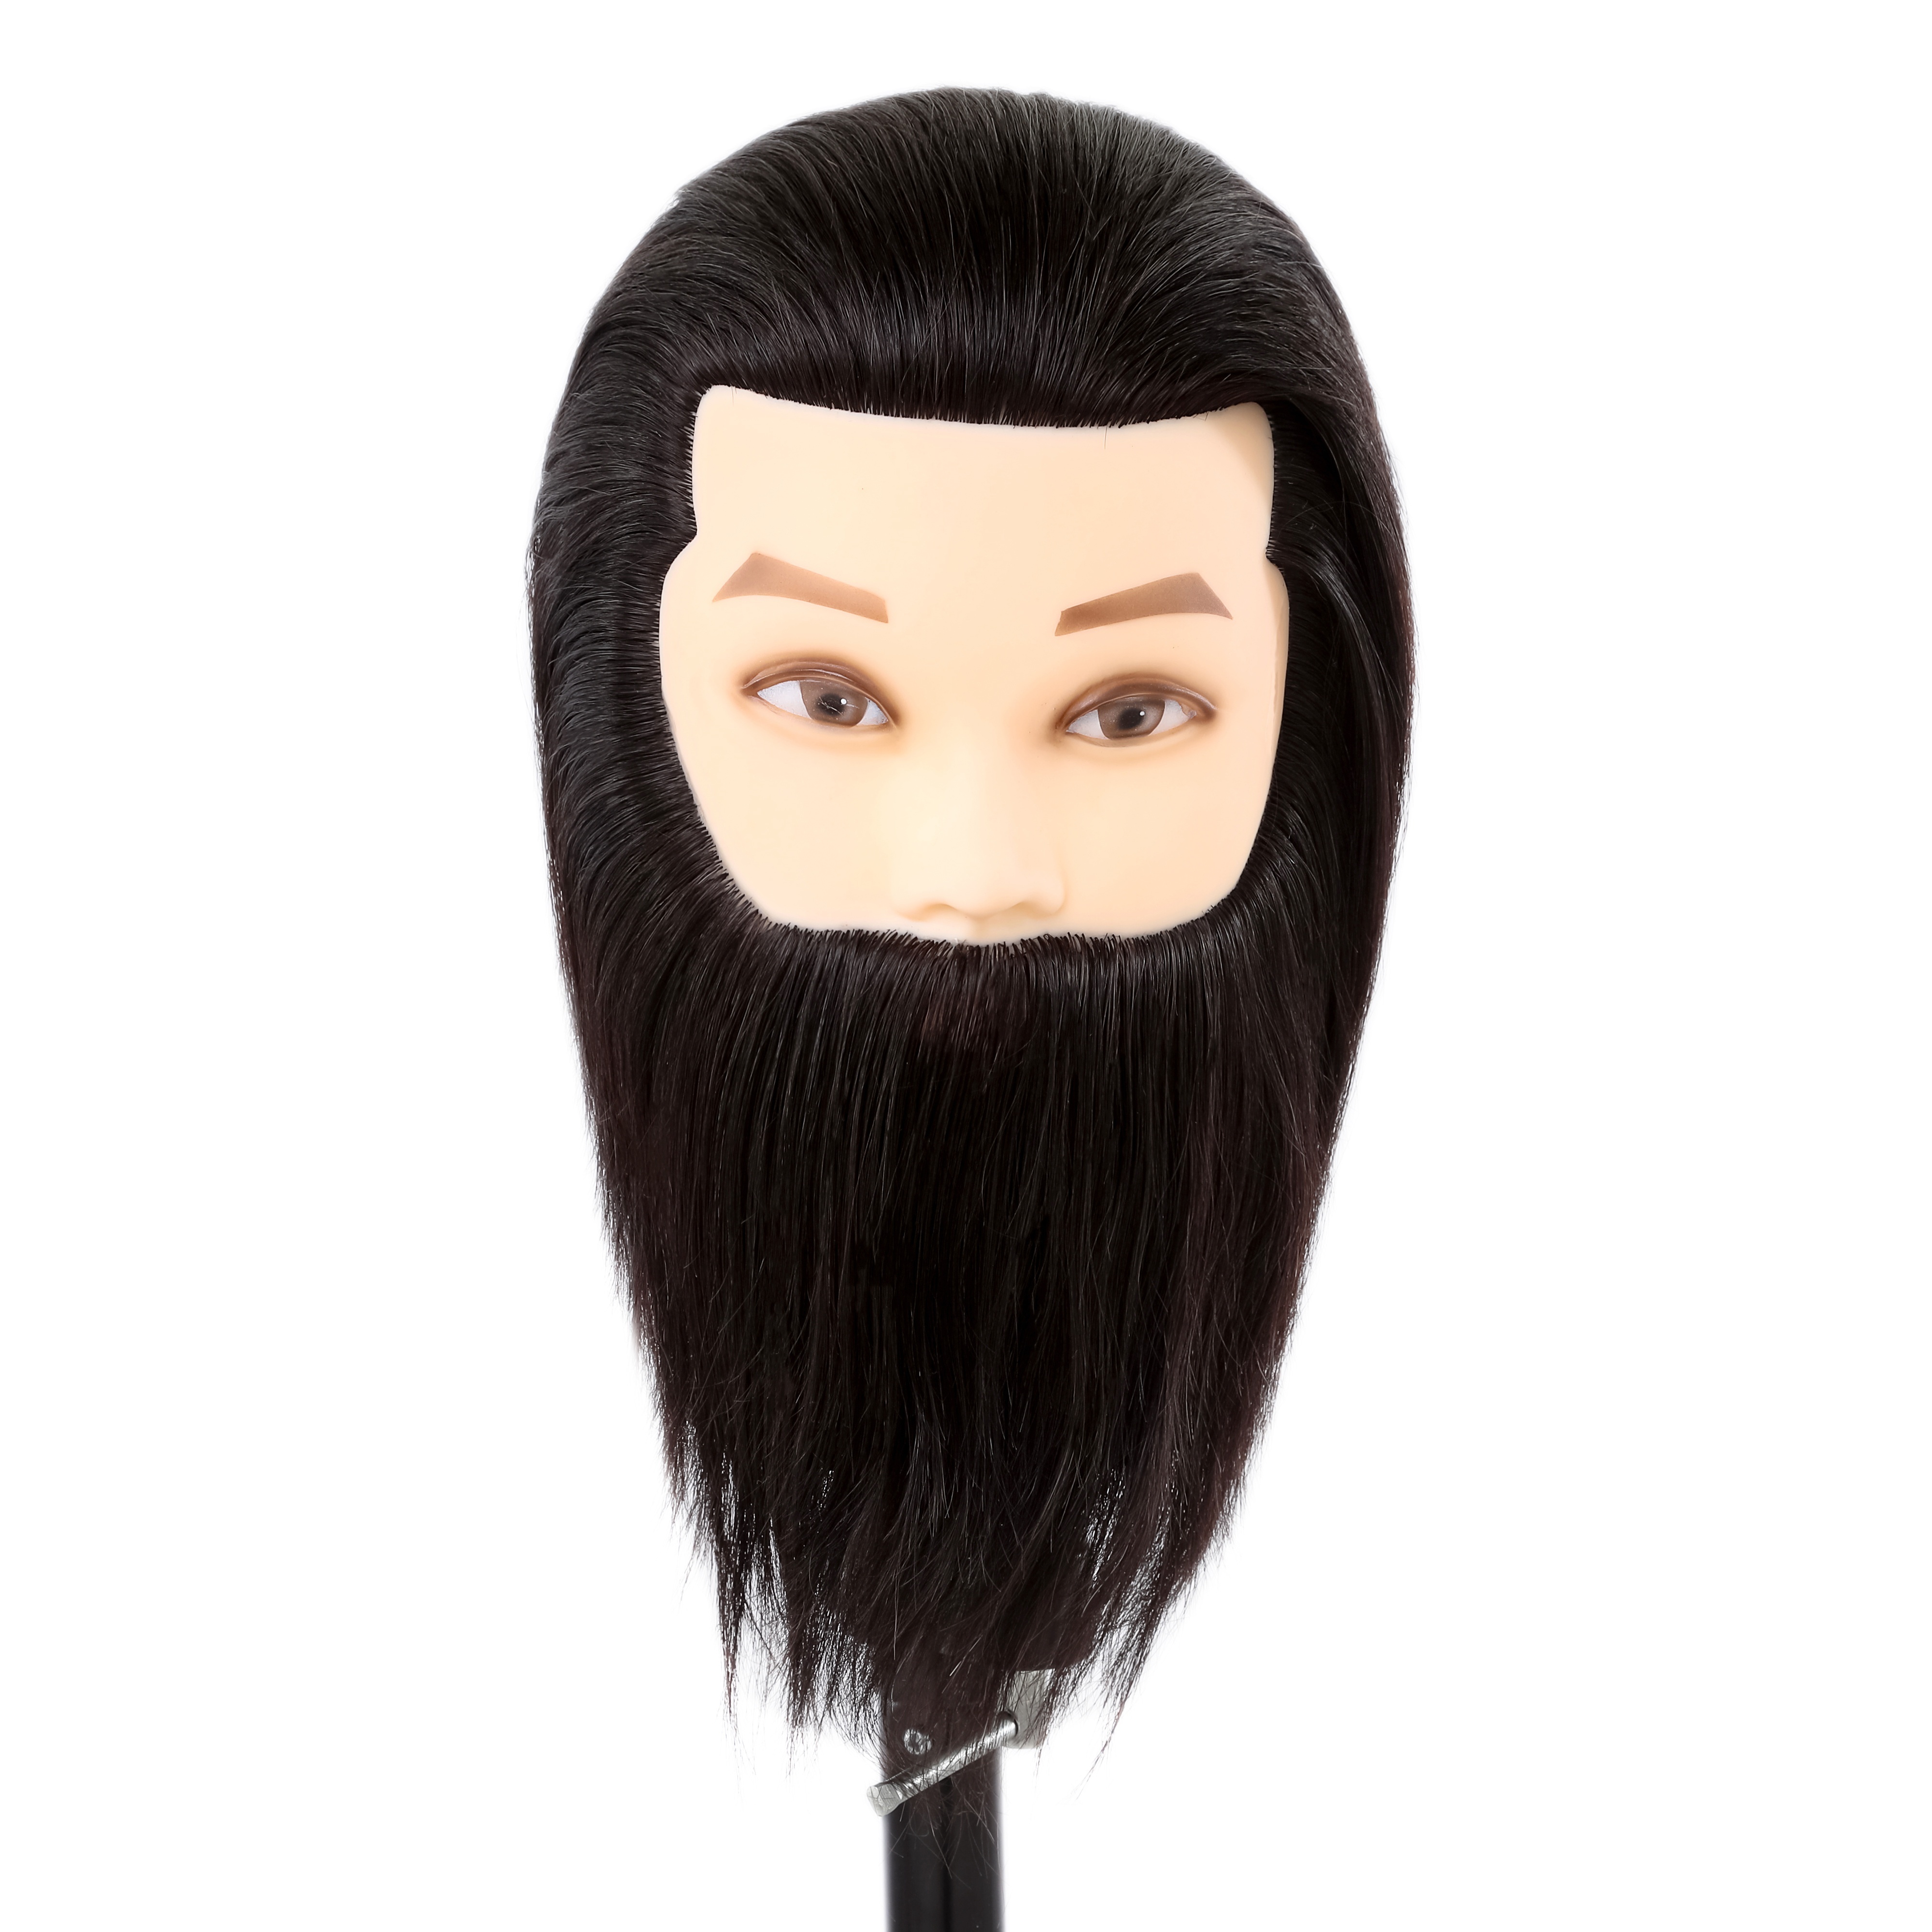 Realistic Male Cheap Styrofoam Wig Heads With Beard For Hair